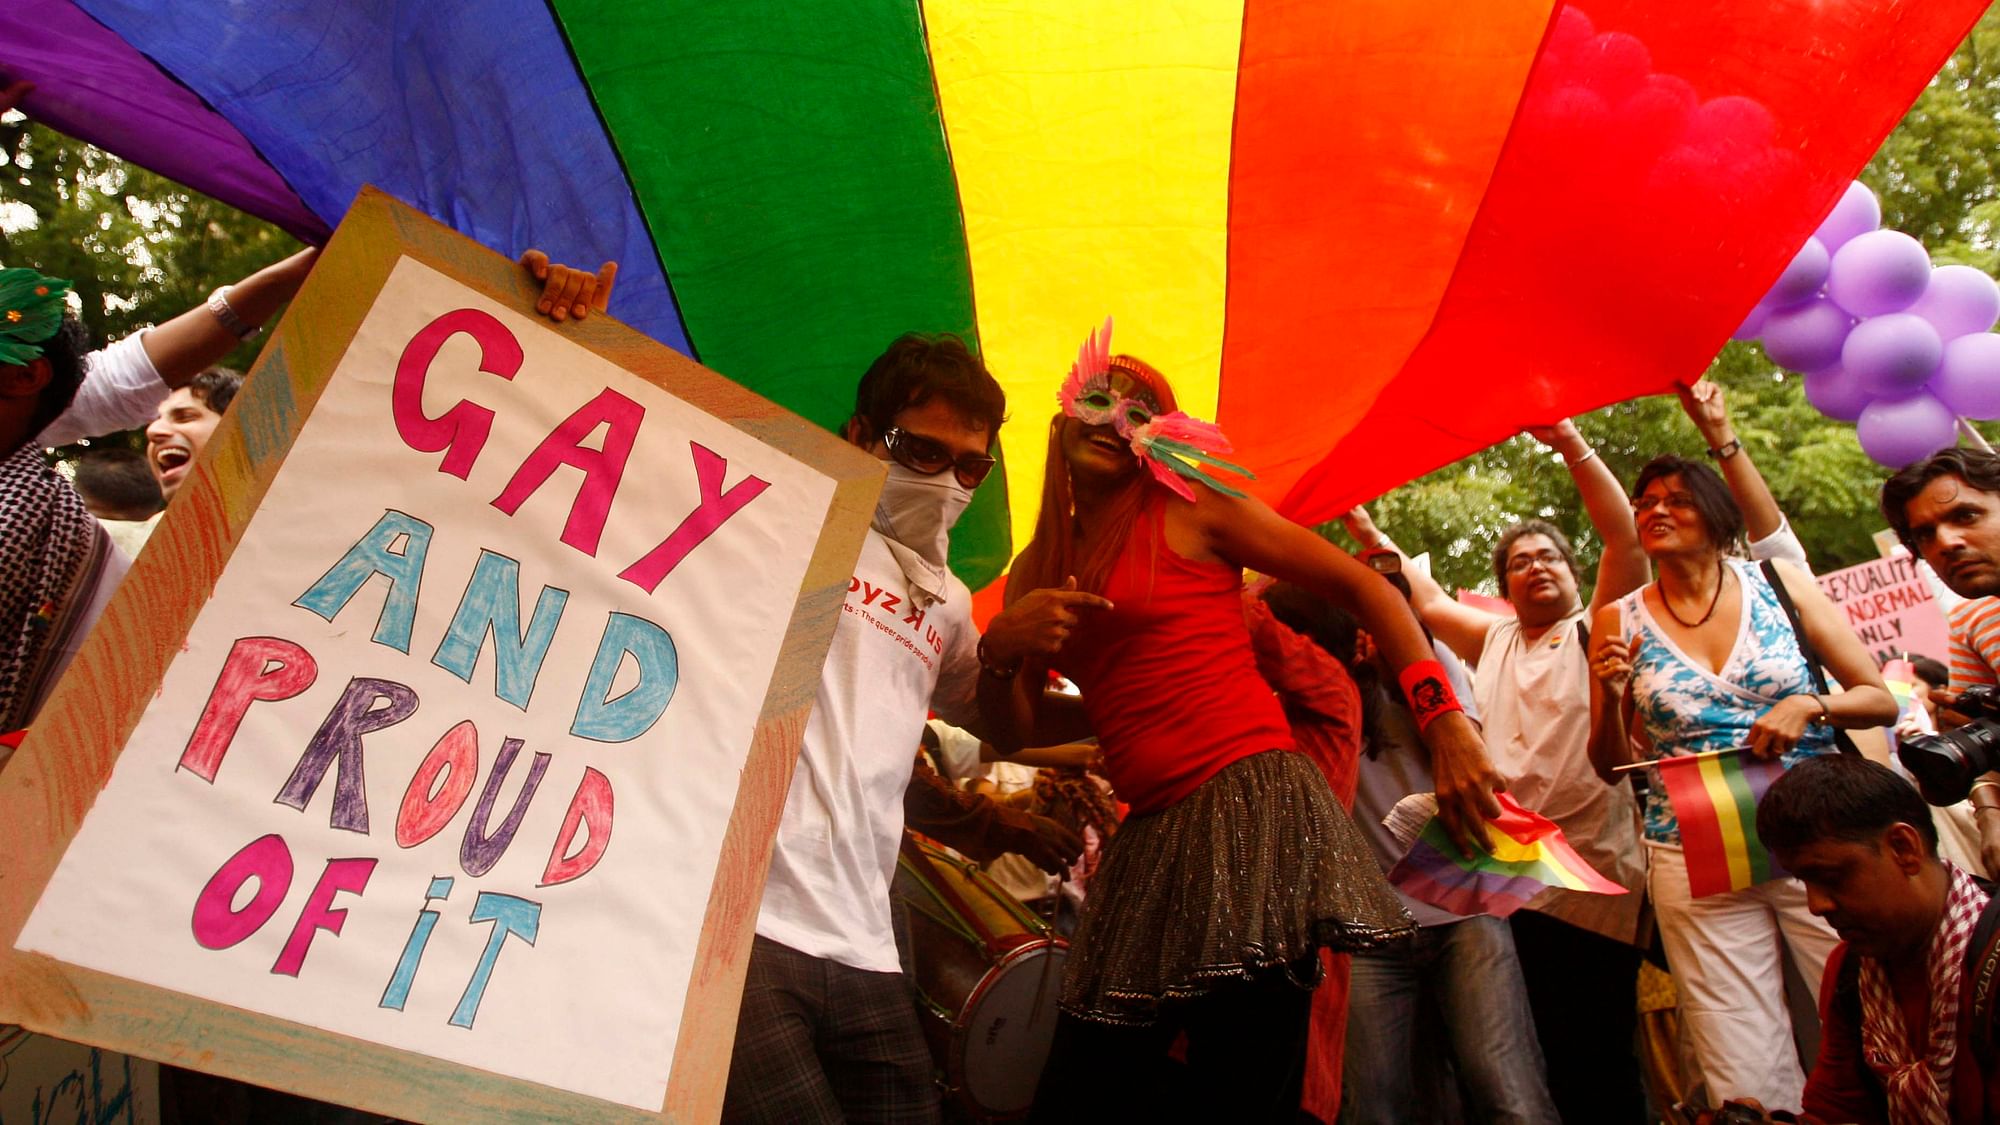 Participants take part in a gay pride march in New Delhi, June 28, 2009. (Photo: Reuters)